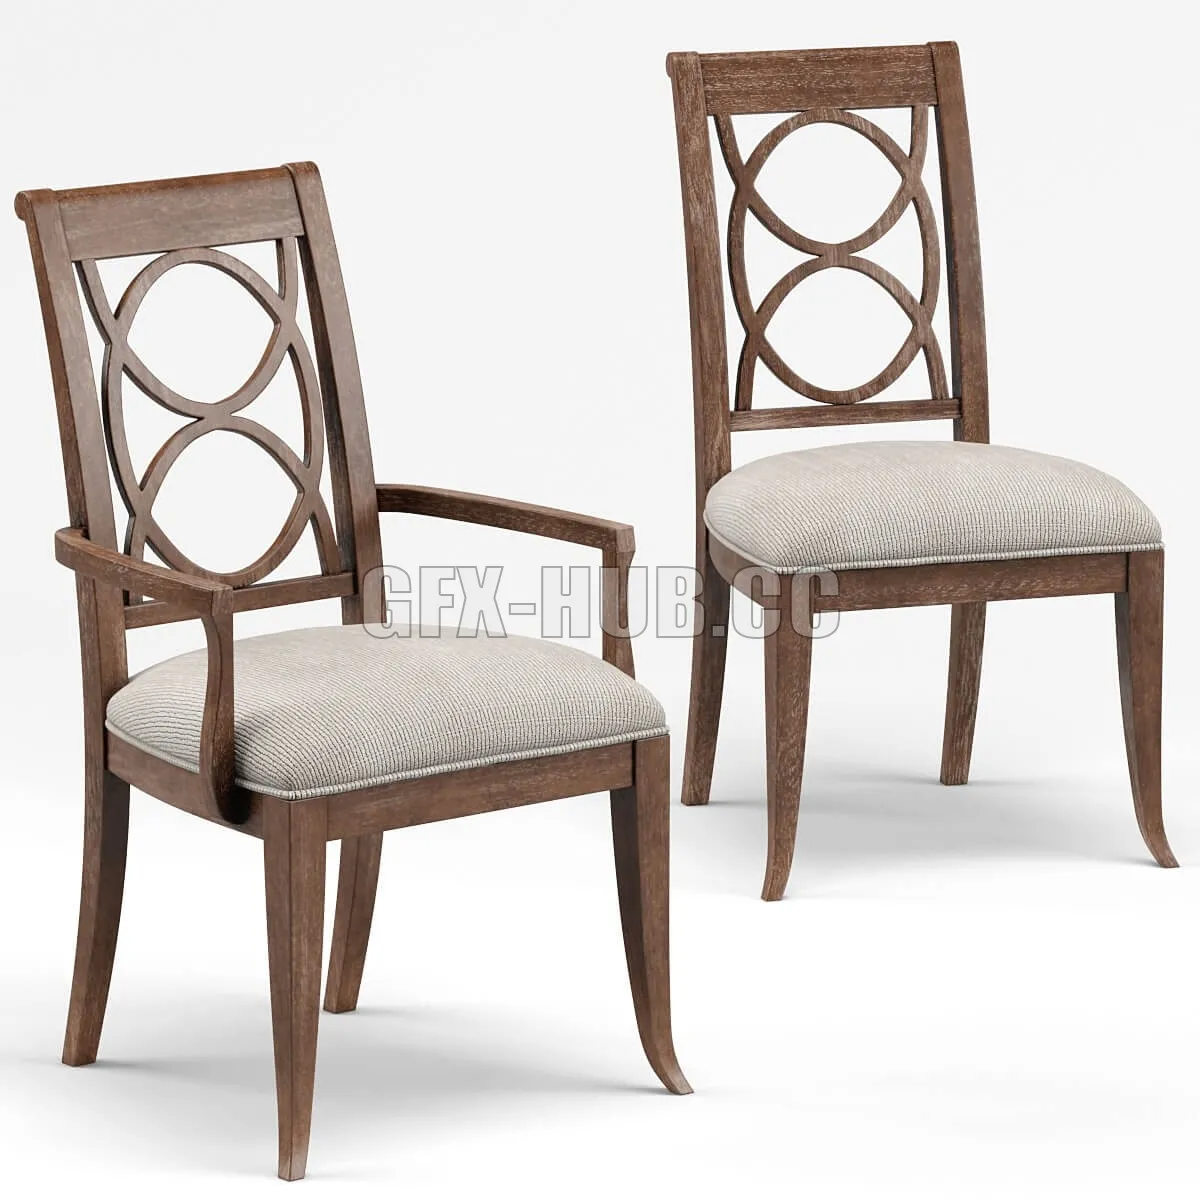 CHAIR – Anthony Baratta Asher Chairs